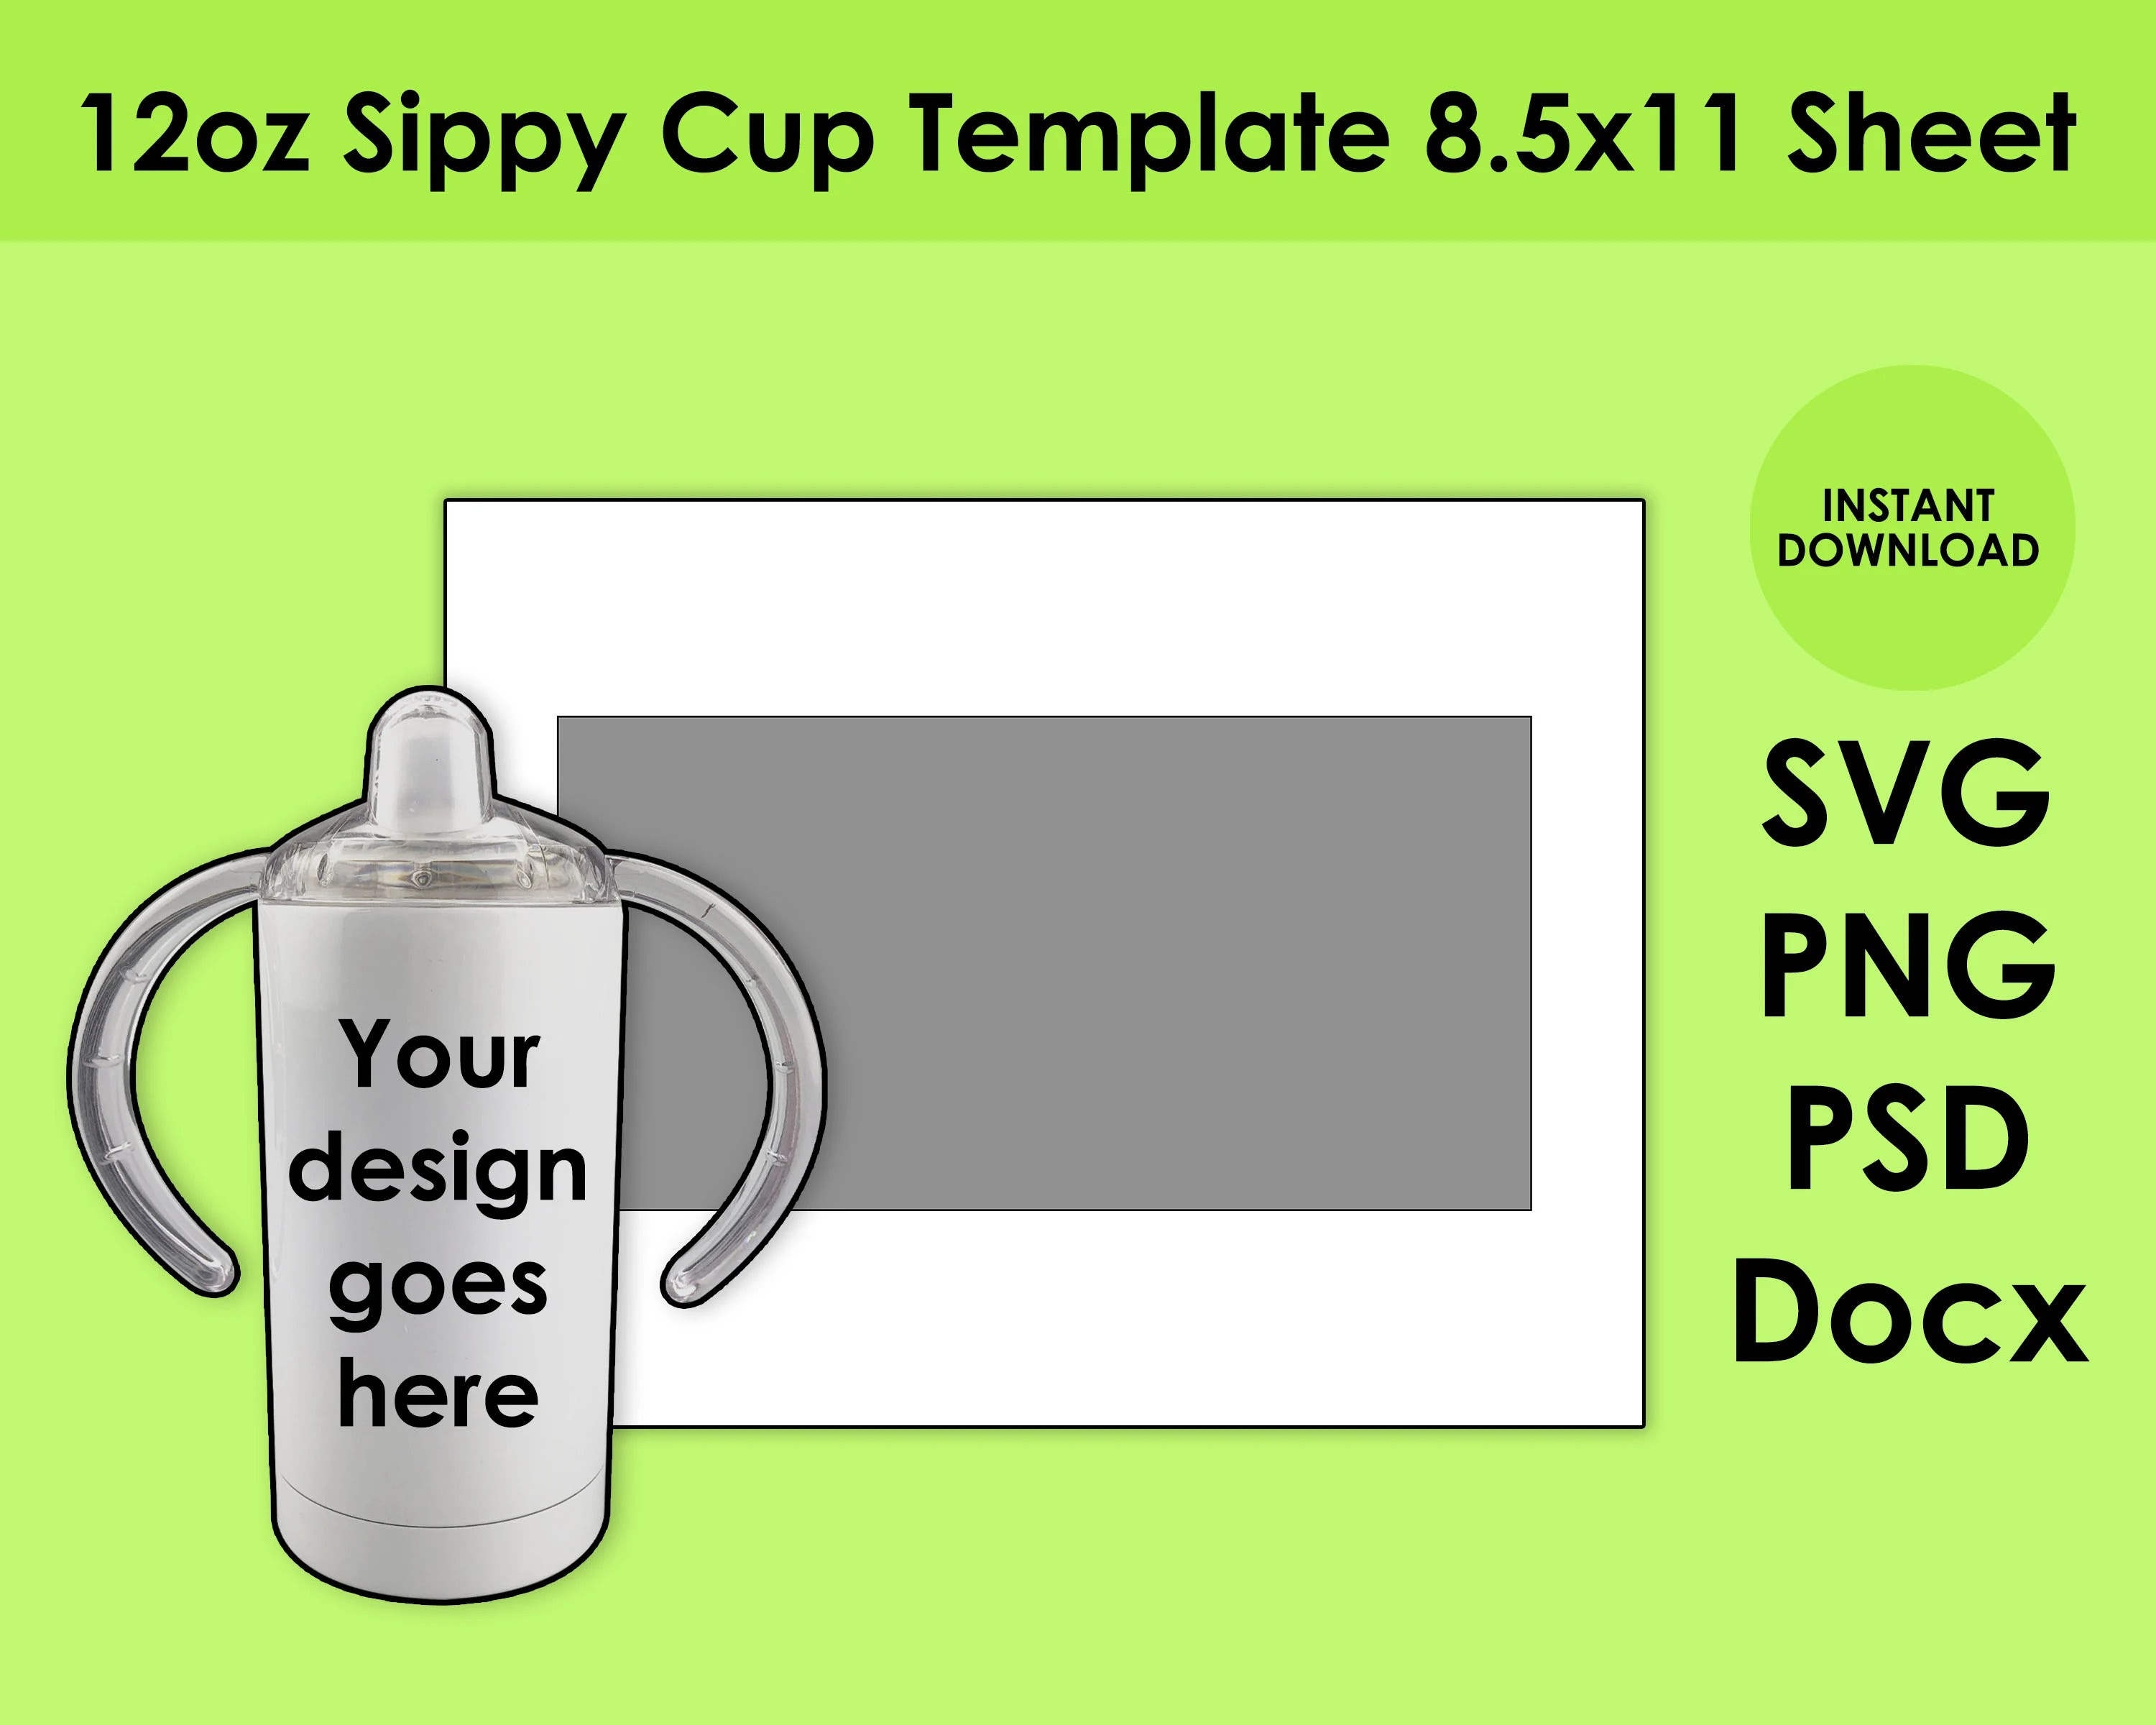 12oz Sippy Cup Template 8.5x11 Sheet SVG PNG PSD and Docx Etsy UK